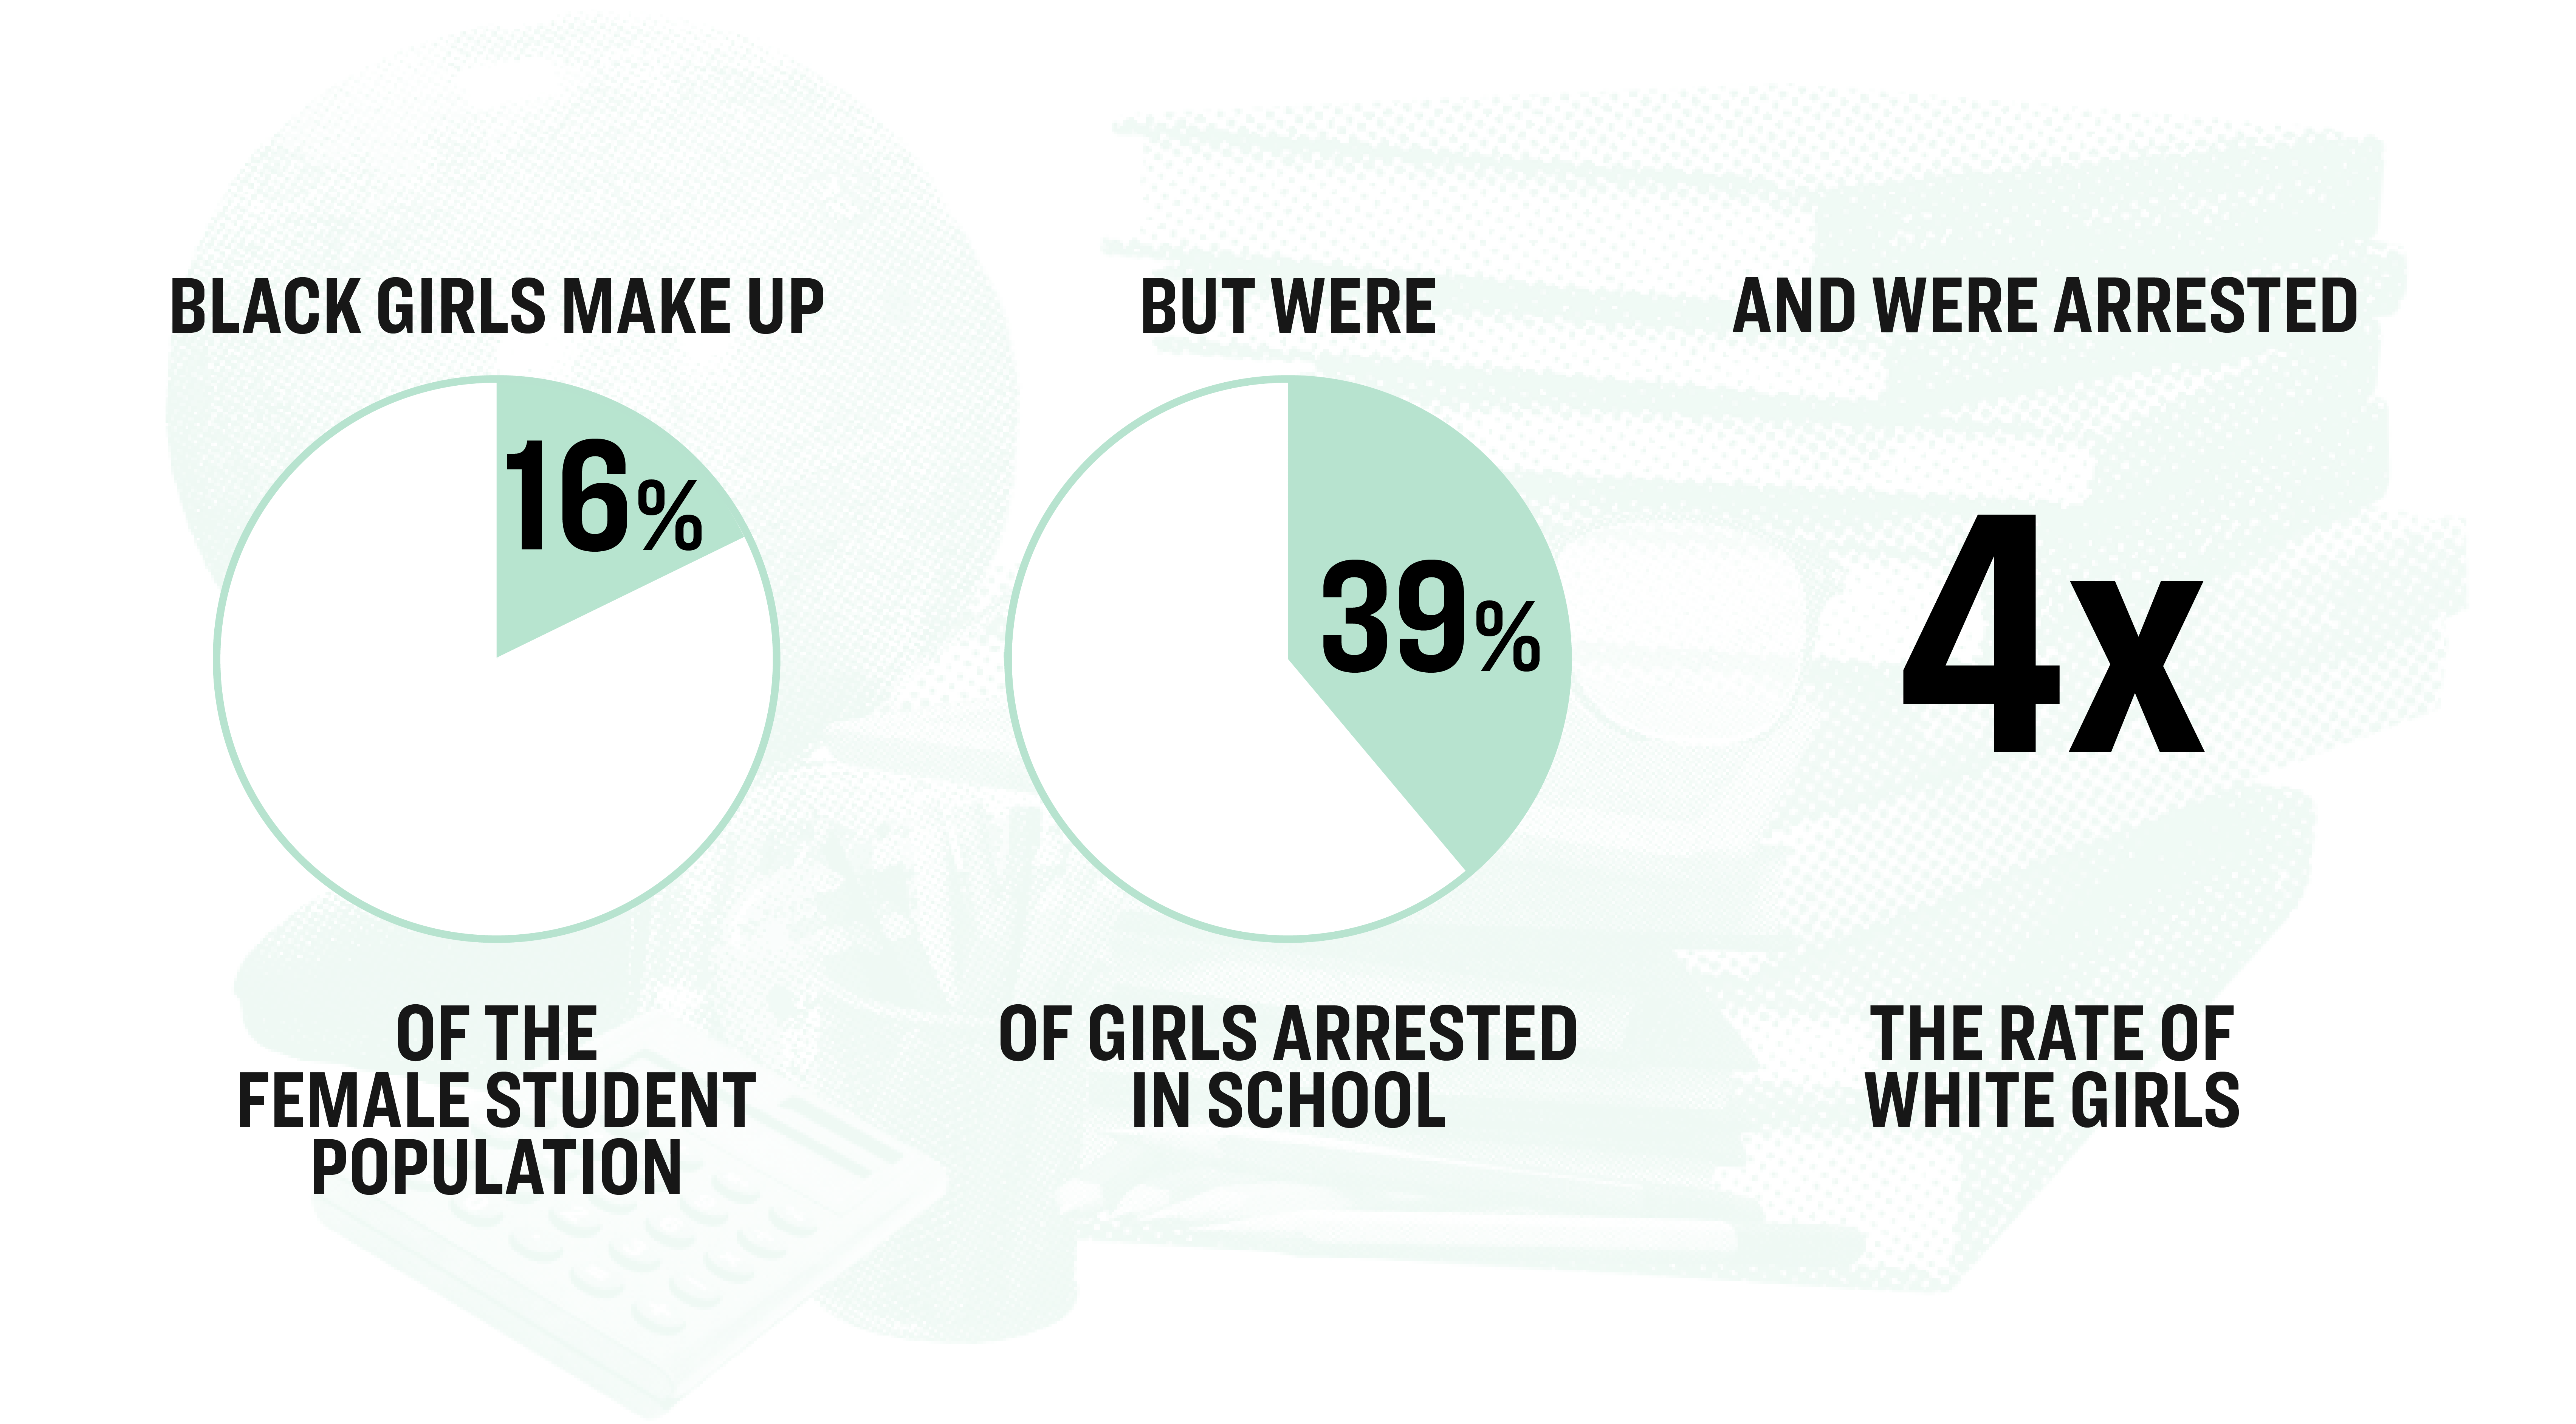 School-to-prison pipeline in numbers. Black girls make up 16% of the female student population but were 39% of girls arrested in school and were arrested at 4x the rate of white girls.